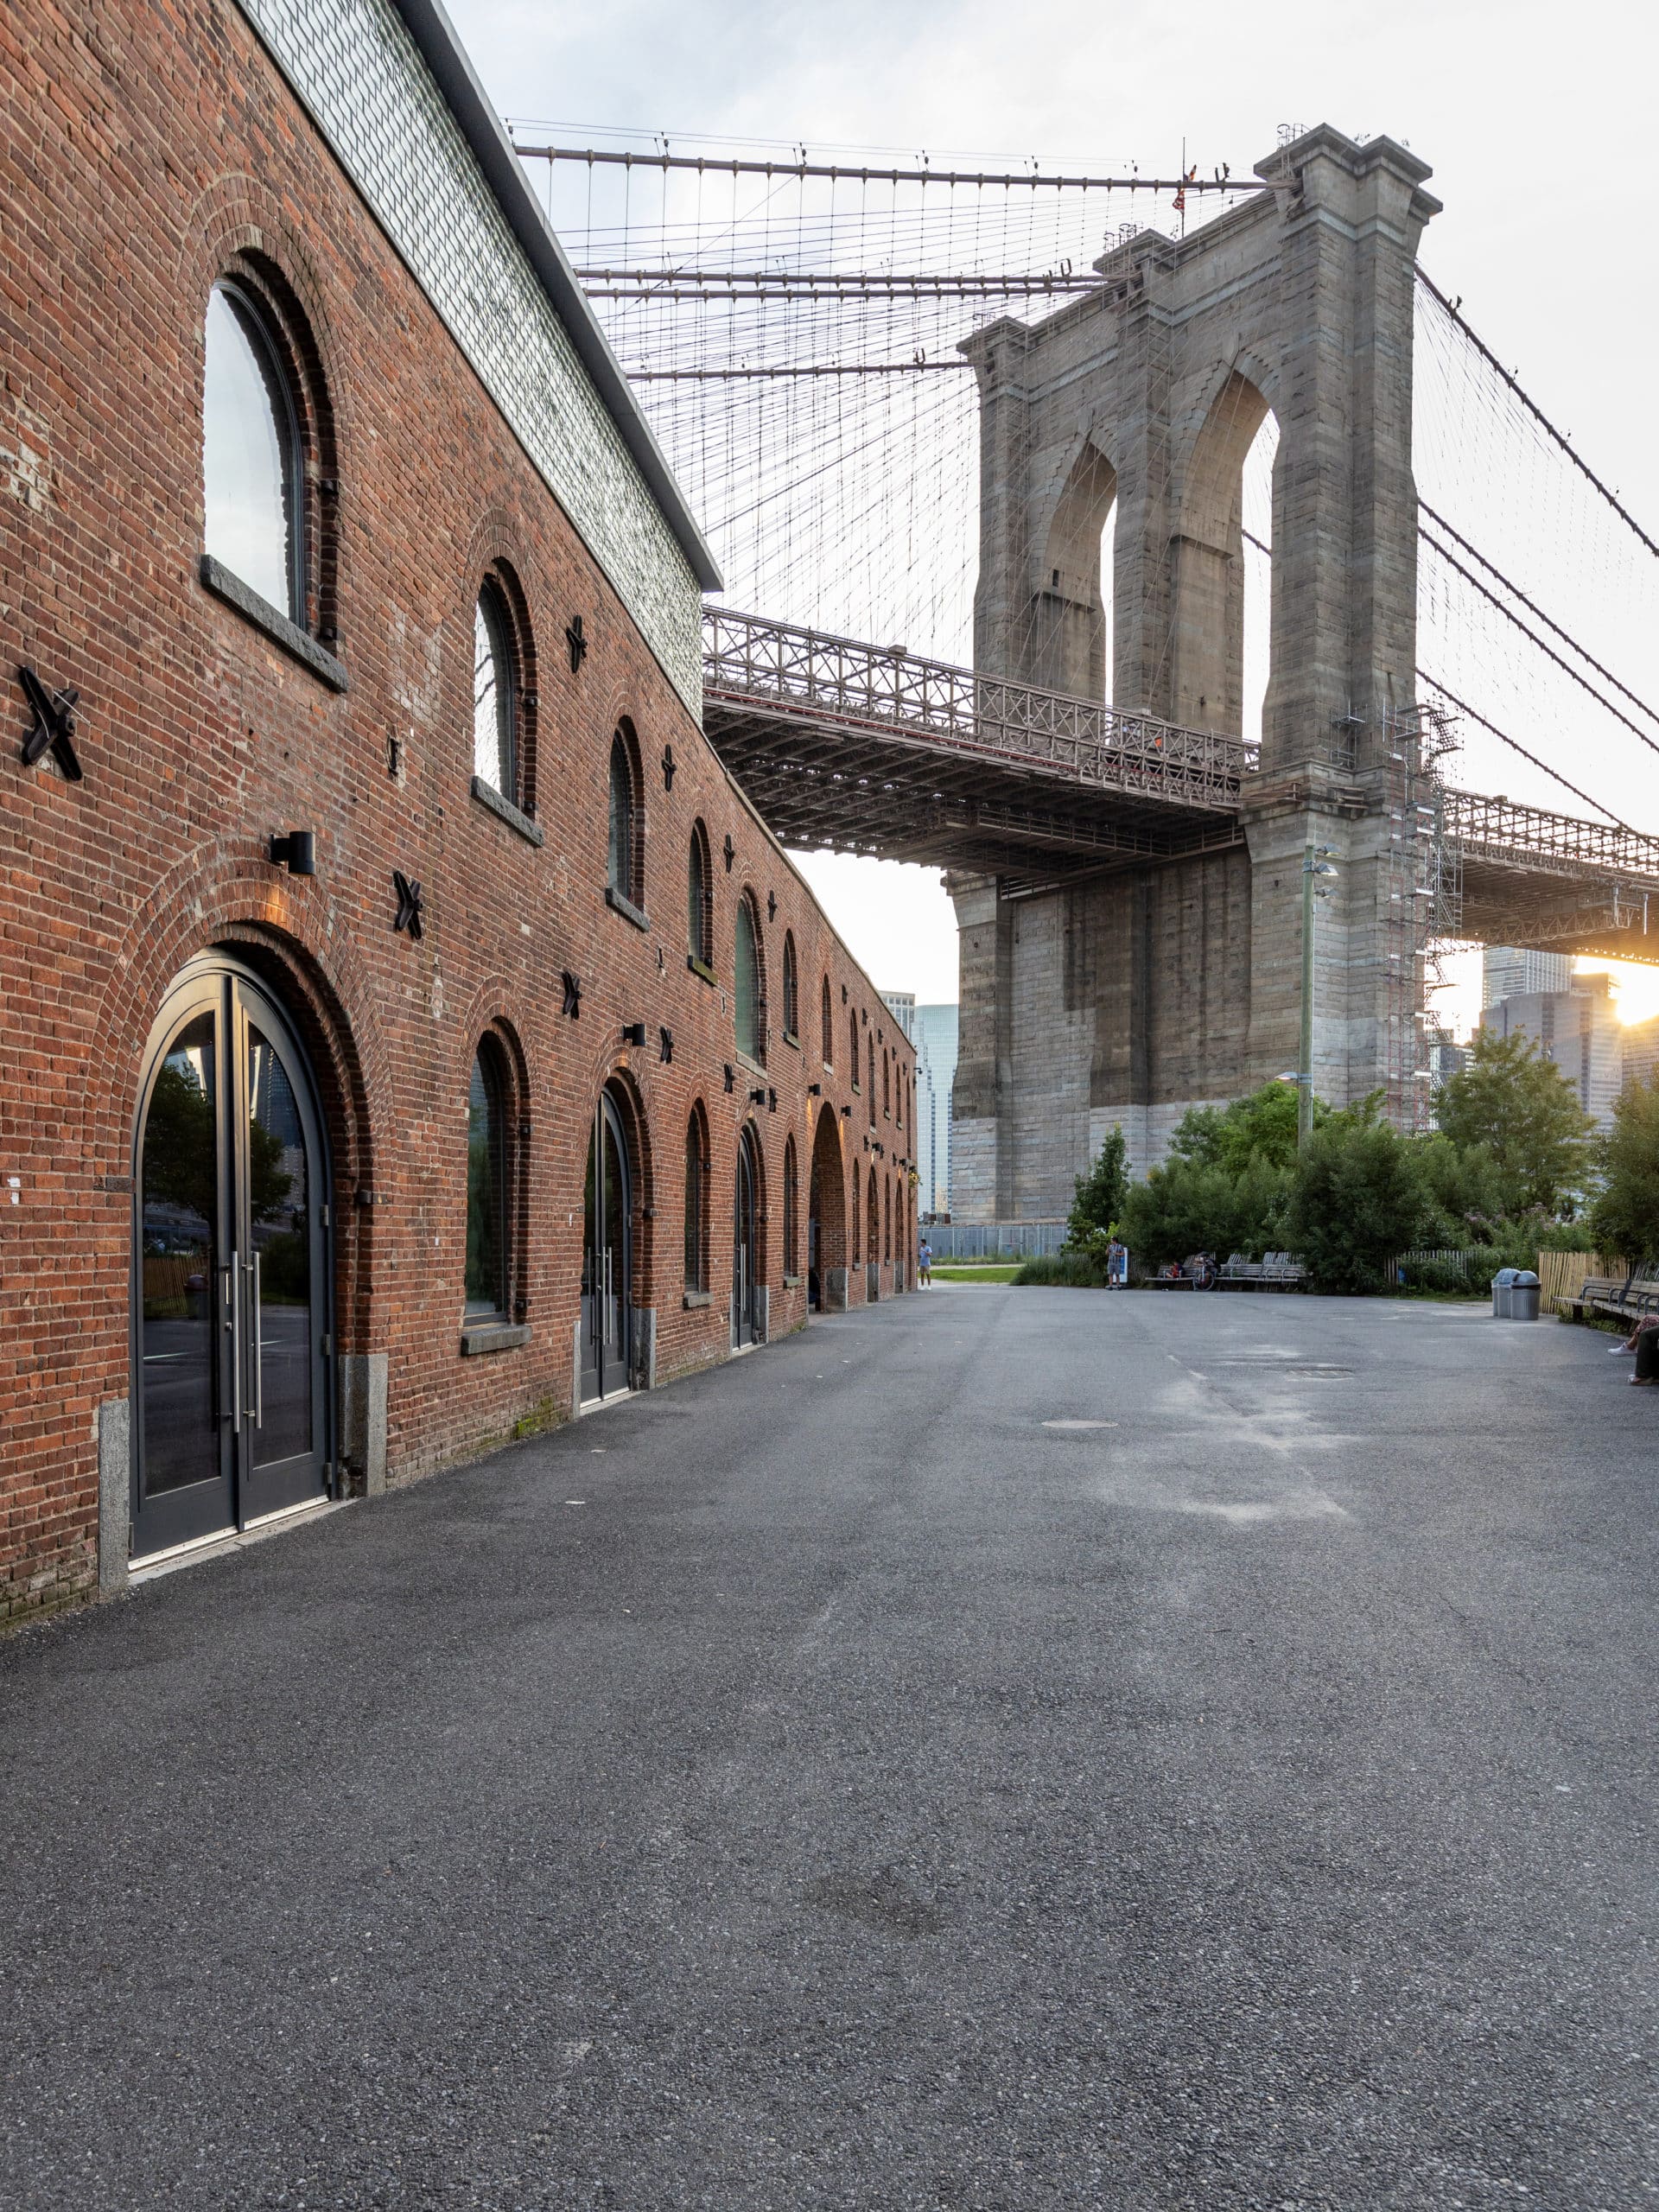 Exterior of St Ann's Warehouse at sunset with the Brooklyn Bridge overhead.